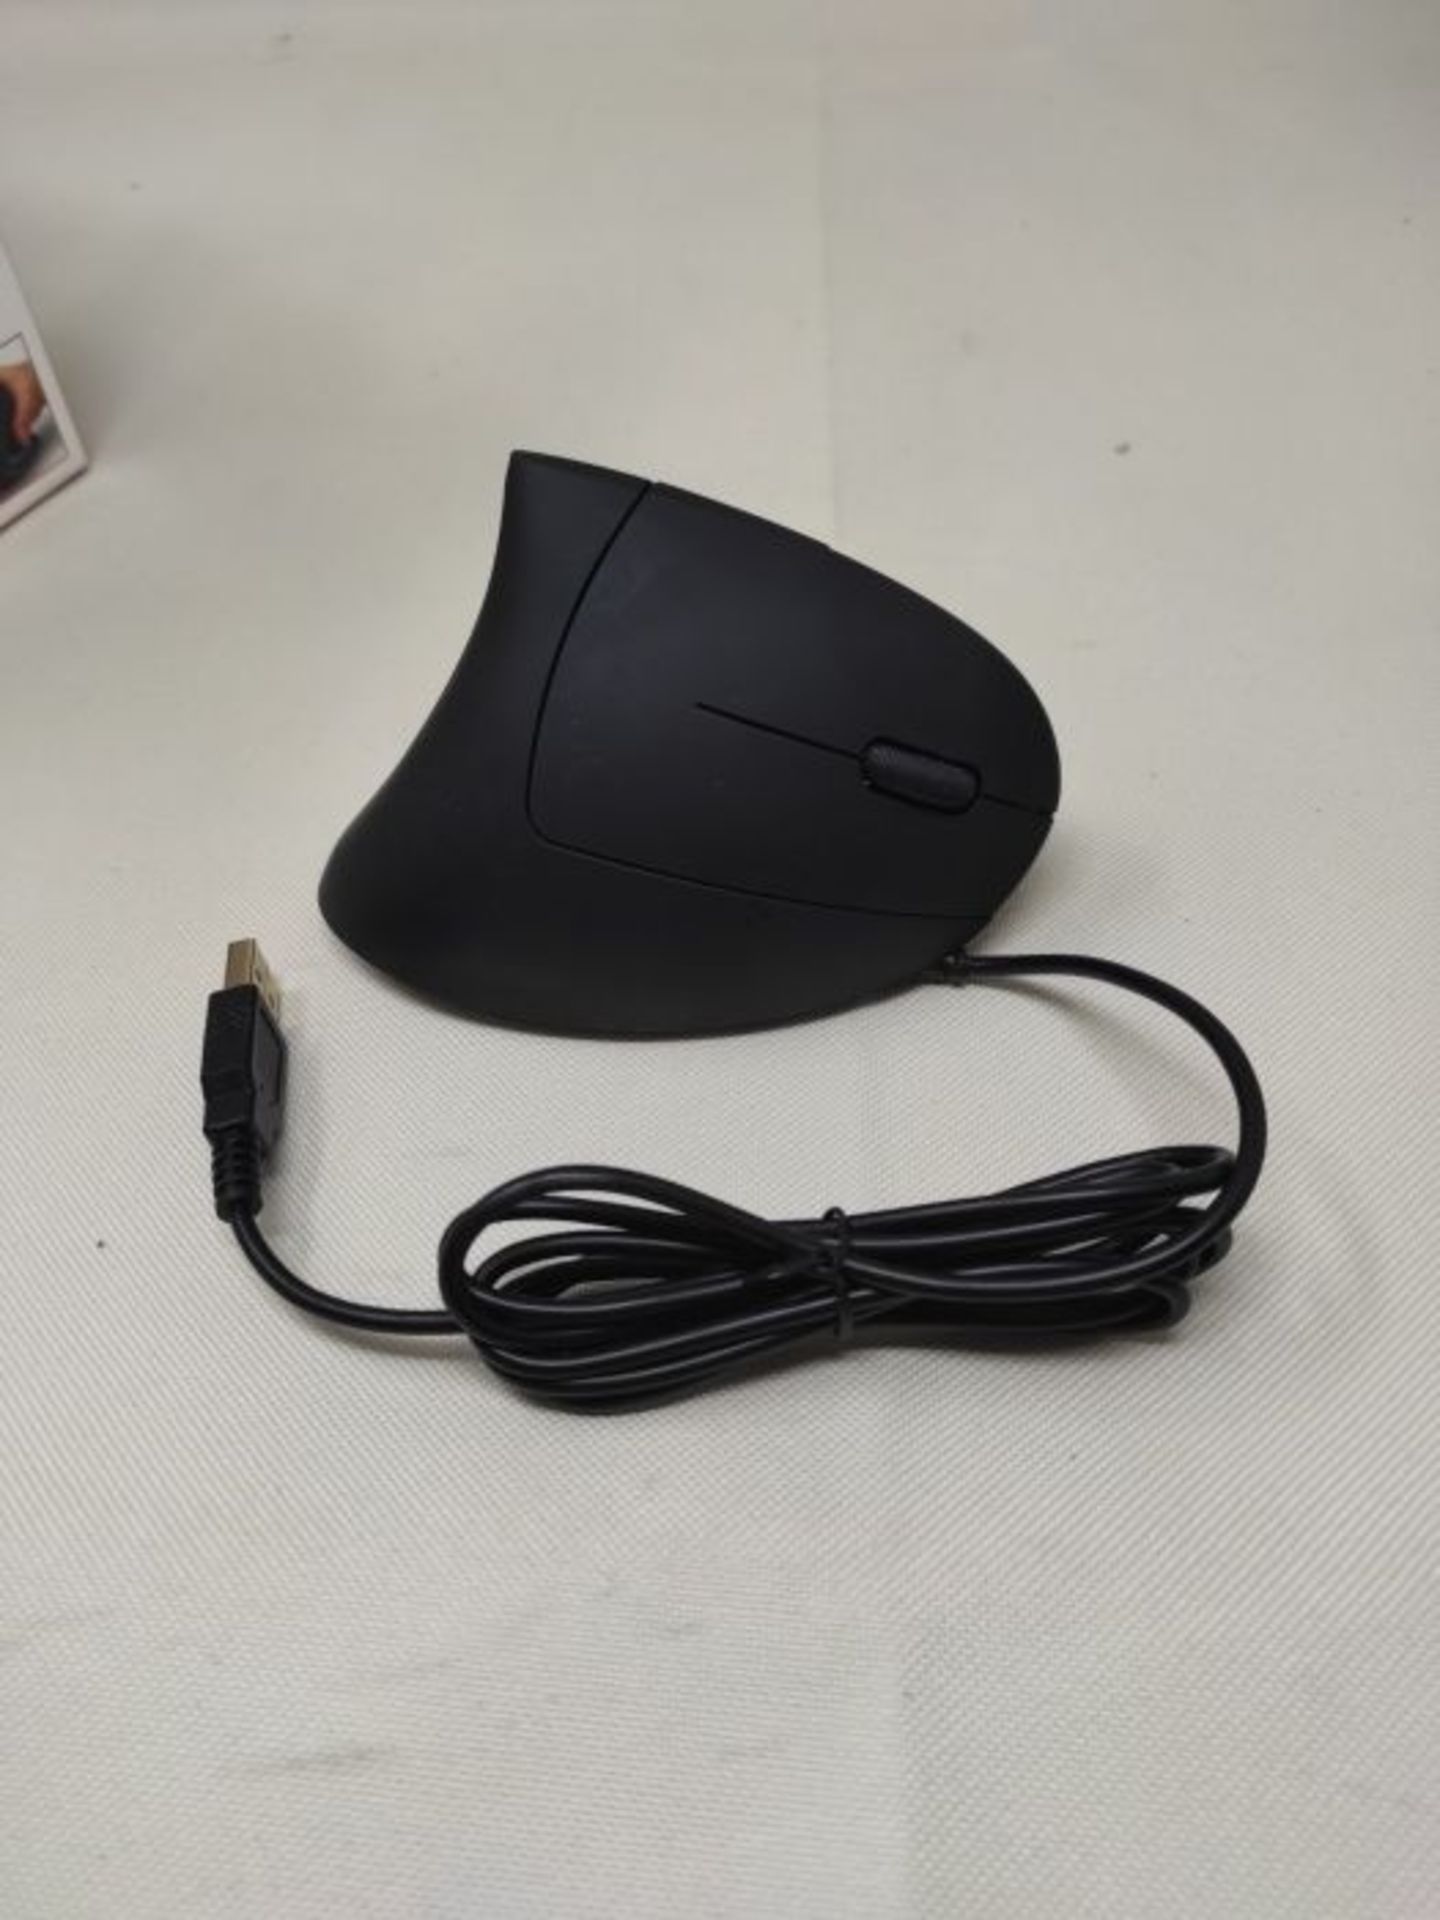 Trust 22885 Verto Wired Ergonomic Mouse for PC and Laptop, Illuminated, 1000-1600 DPI, - Image 3 of 3